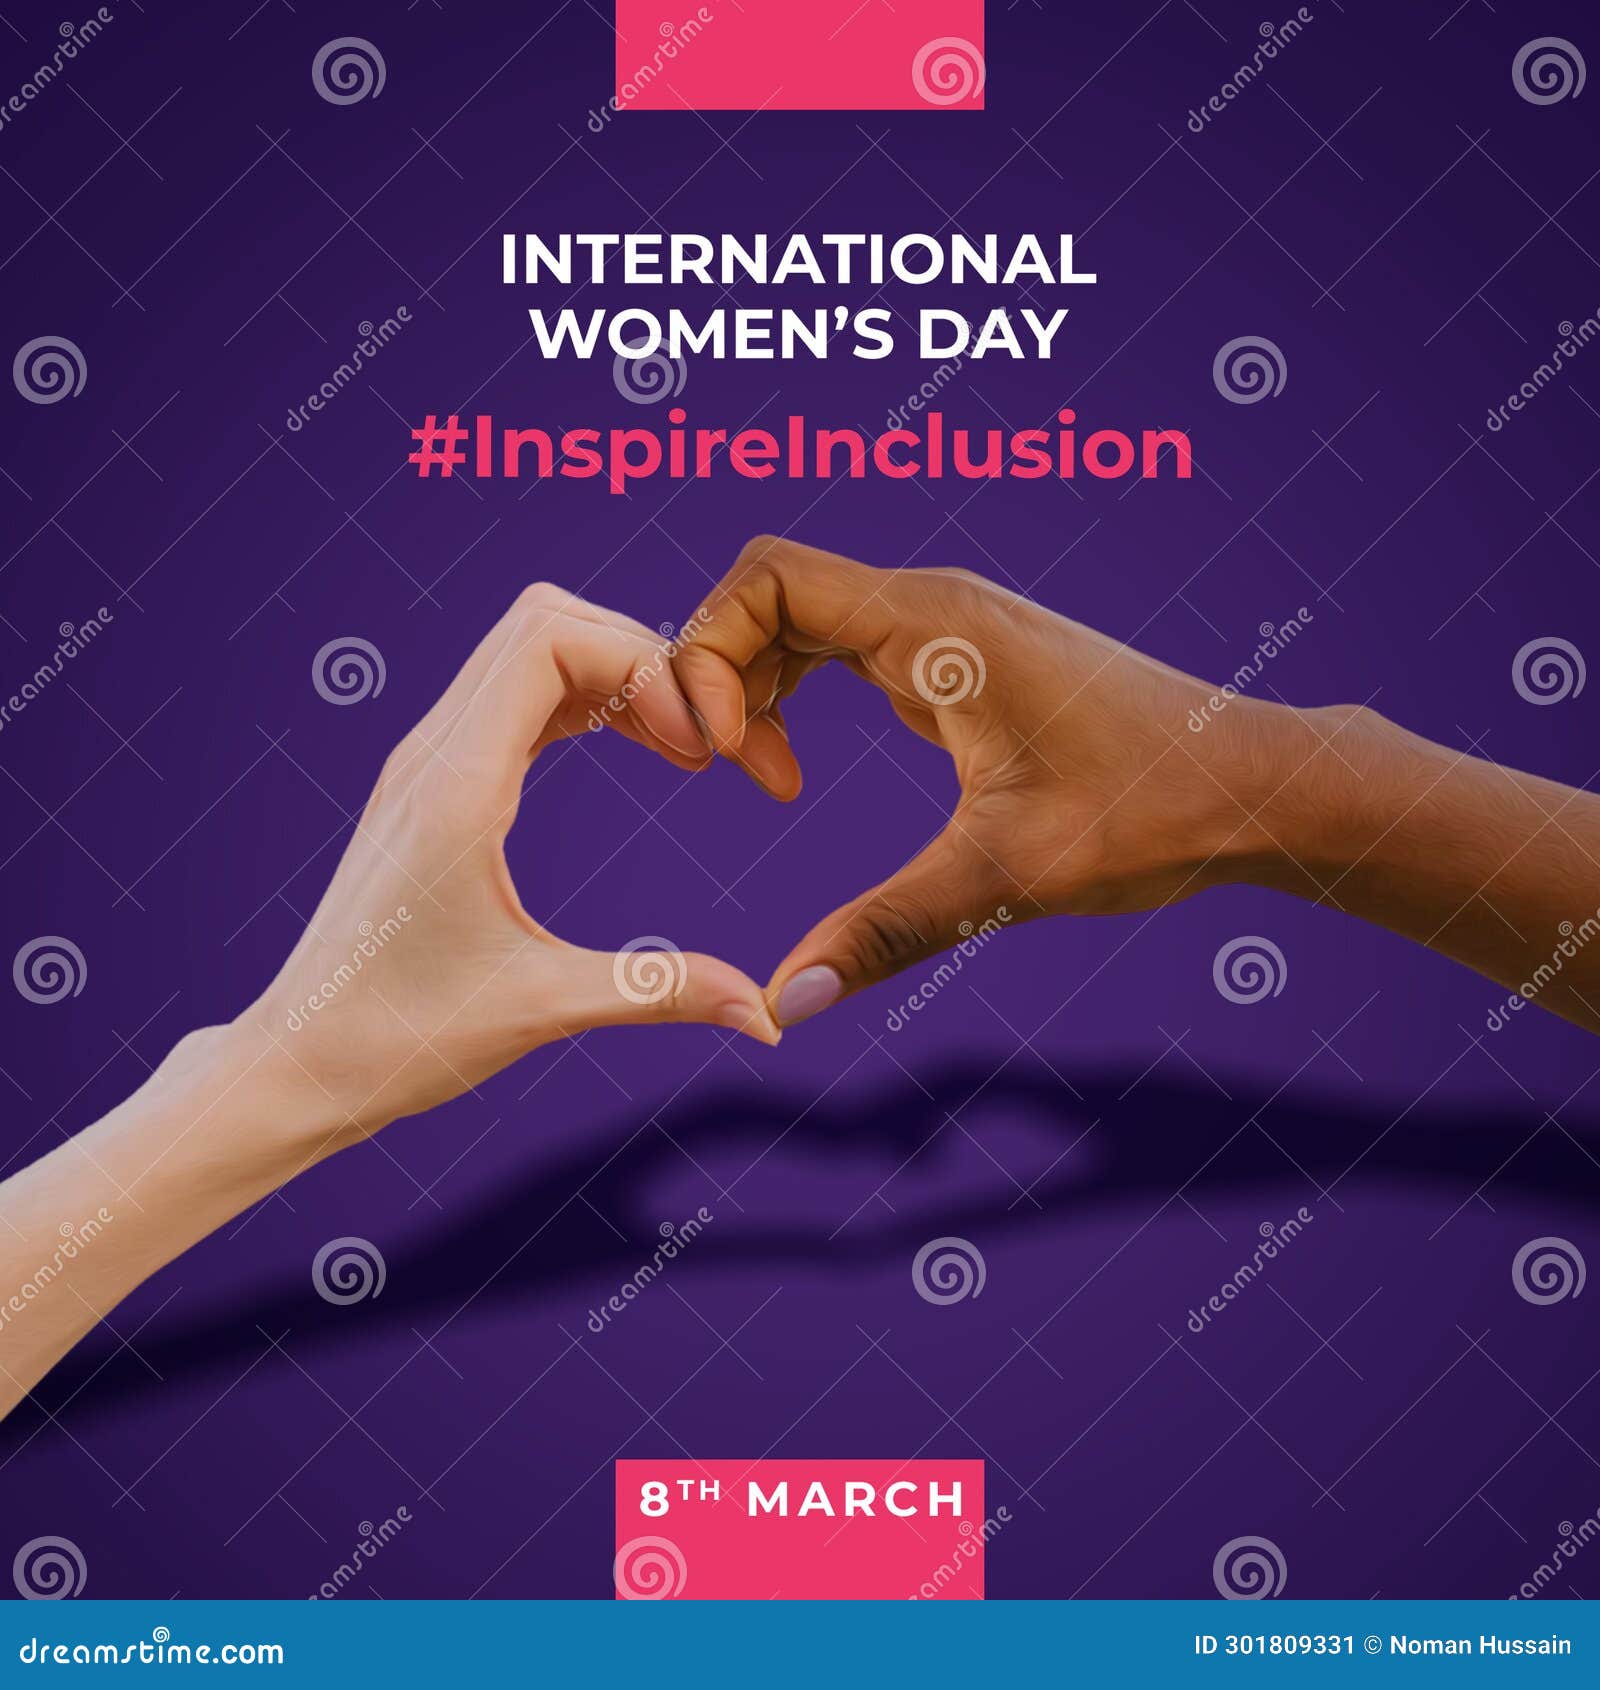 8th march women's day inspire inclusion